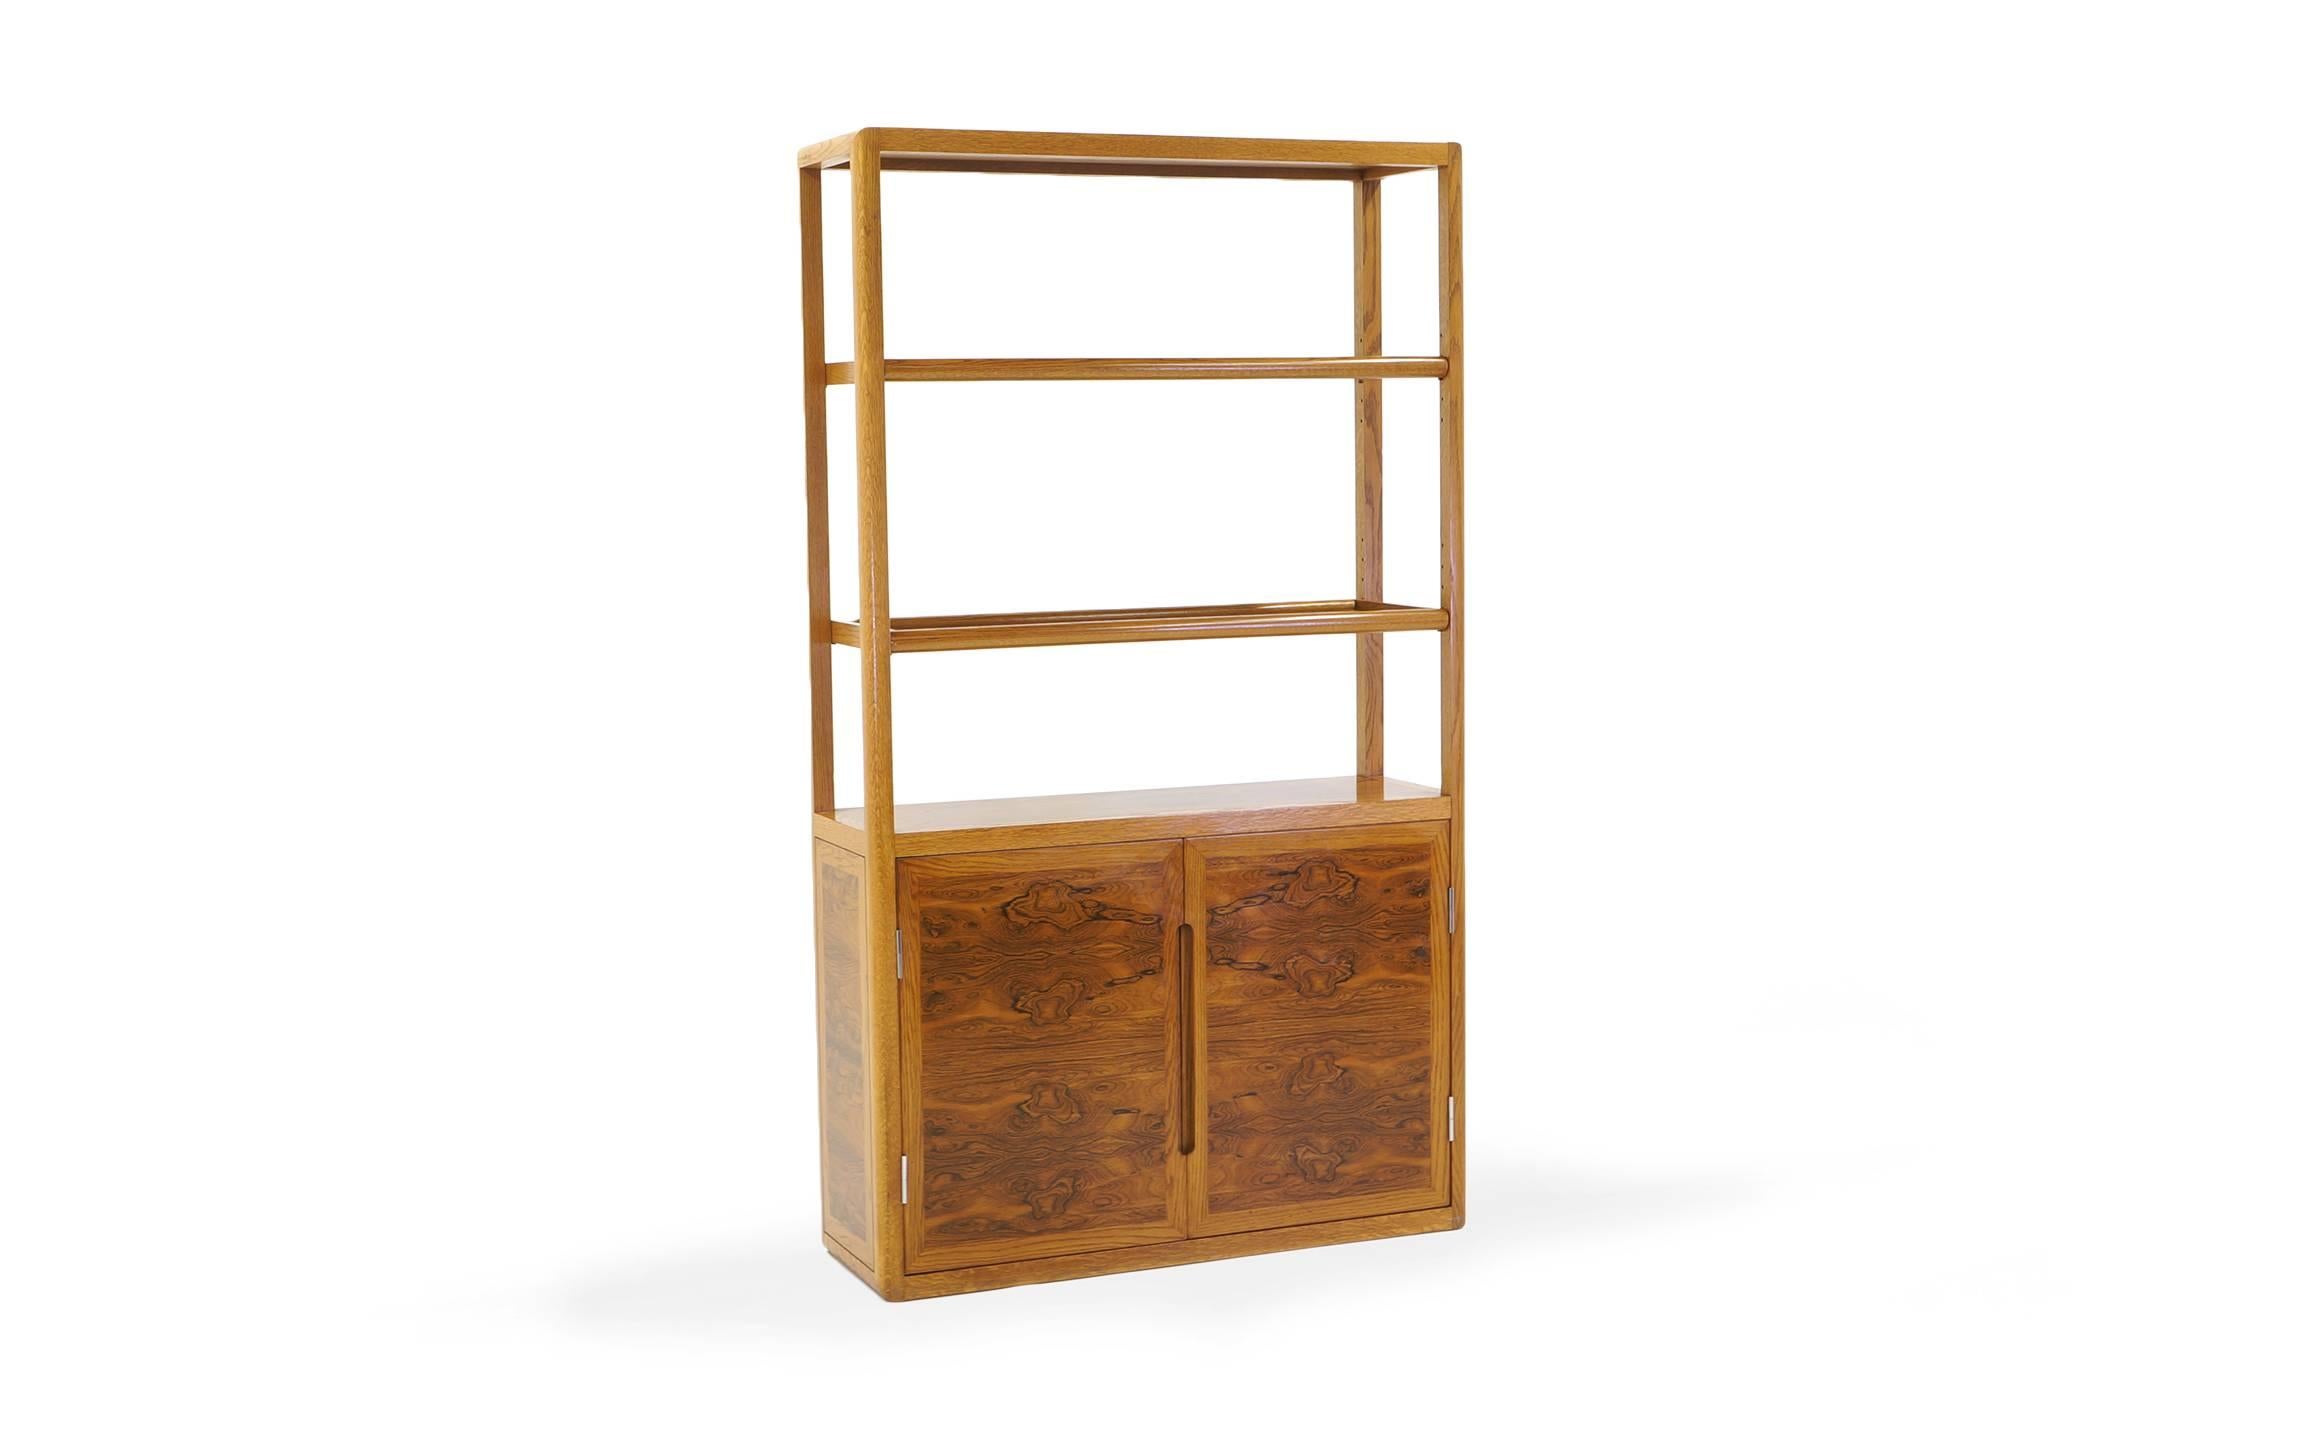 Edward Wormley storage cabinet with adjustable shelves. Beautiful Brazilian rosewood case and shelves with a bleached mahogany frame. 78 inches high. 45 inches wide, 15 inches deep. Base section of cabinet is 32 inches in height. Interior shelves